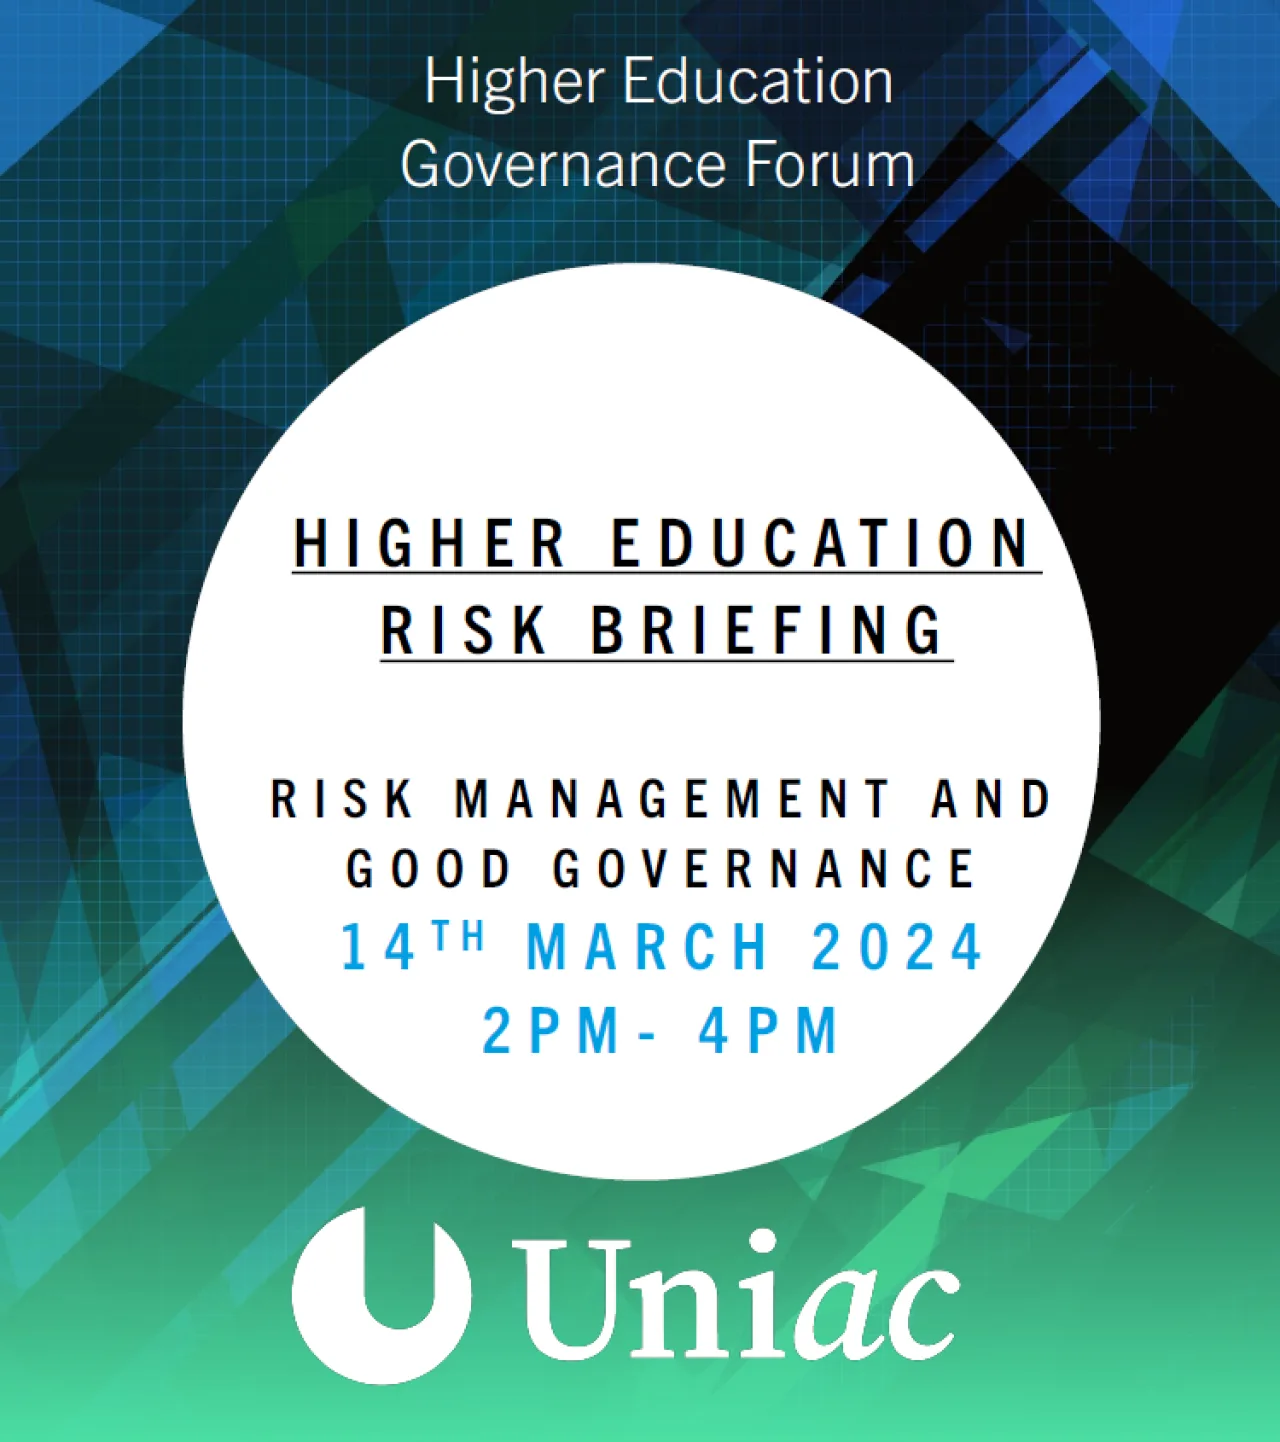 Higher Education Risk Briefing Event - 14th March 2024